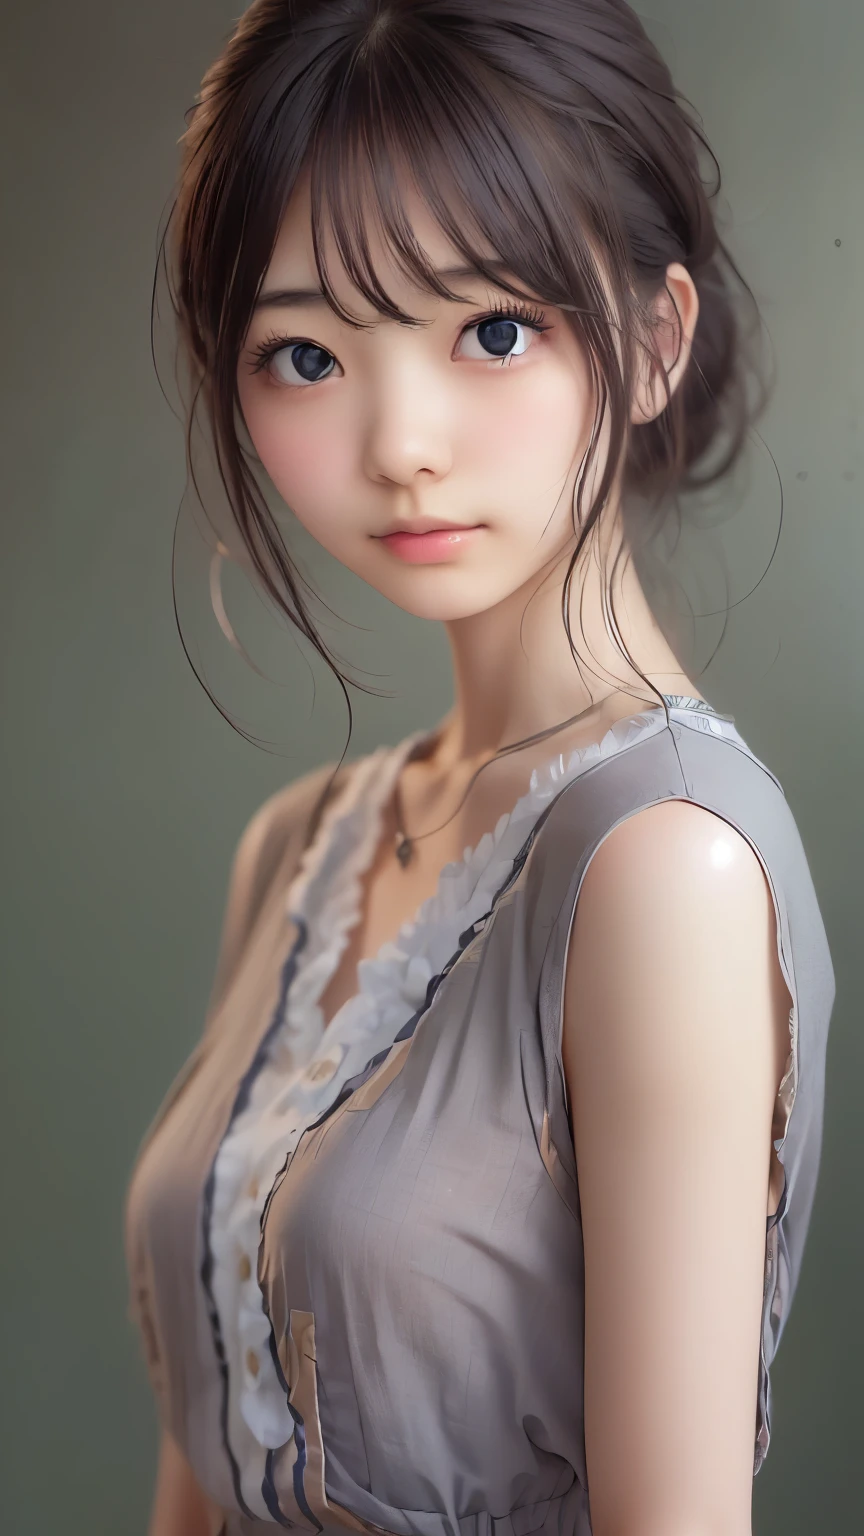 ((sfw: 1.4)), ((detailed face,  professional photography)), ((sfw, Business Professional Attire, 1 Girl)), Ultra High Resolution, (Realistic: 1.4), RAW Photo, Best Quality, (Photorealistic Stick), Focus, Soft Light, ((20 years old)), ((Japanese)), (( (young face))), (surface), (depth of field), masterpiece, (realistic), woman, bangs, ((1 girl))

